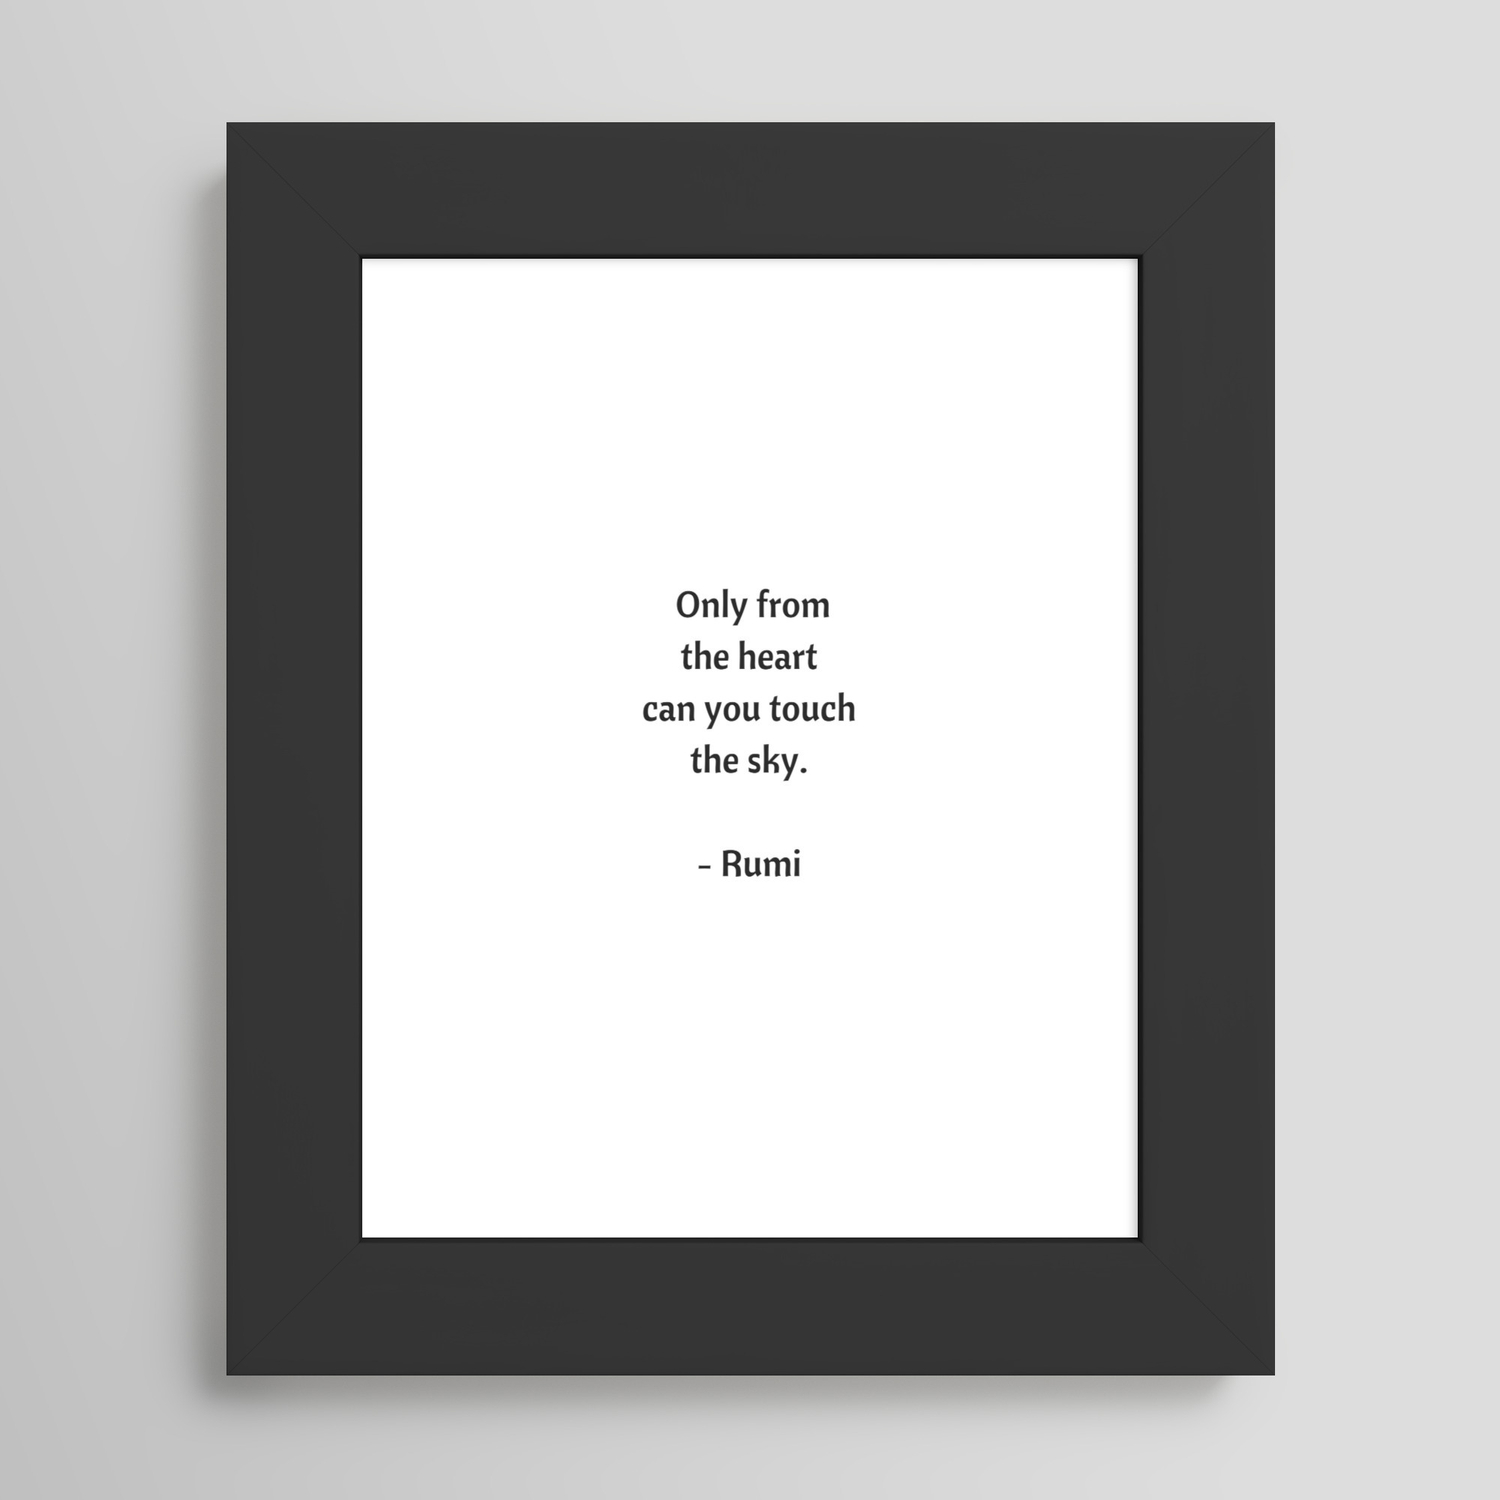 Rumi Inspirational Quotes - Only from the heart can you touch the sky  Framed Art Print by InpireMe | Society6